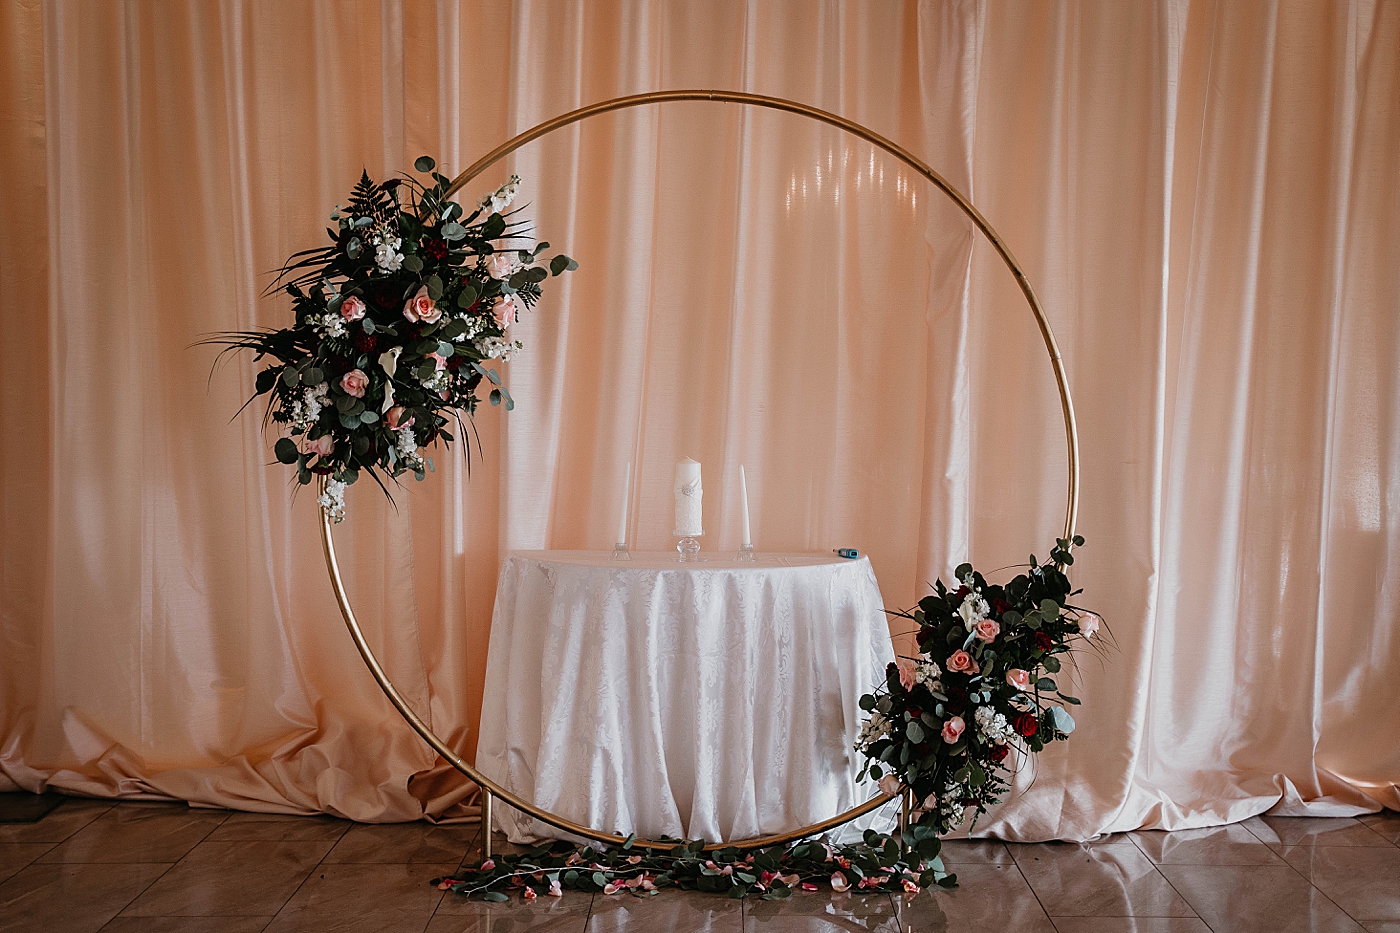 Ceremony detail shot of circular hoop alter with floral decor and candle unity table Romantic Winter Wedding captured NYC Wedding Planner Poppy and Lynn 